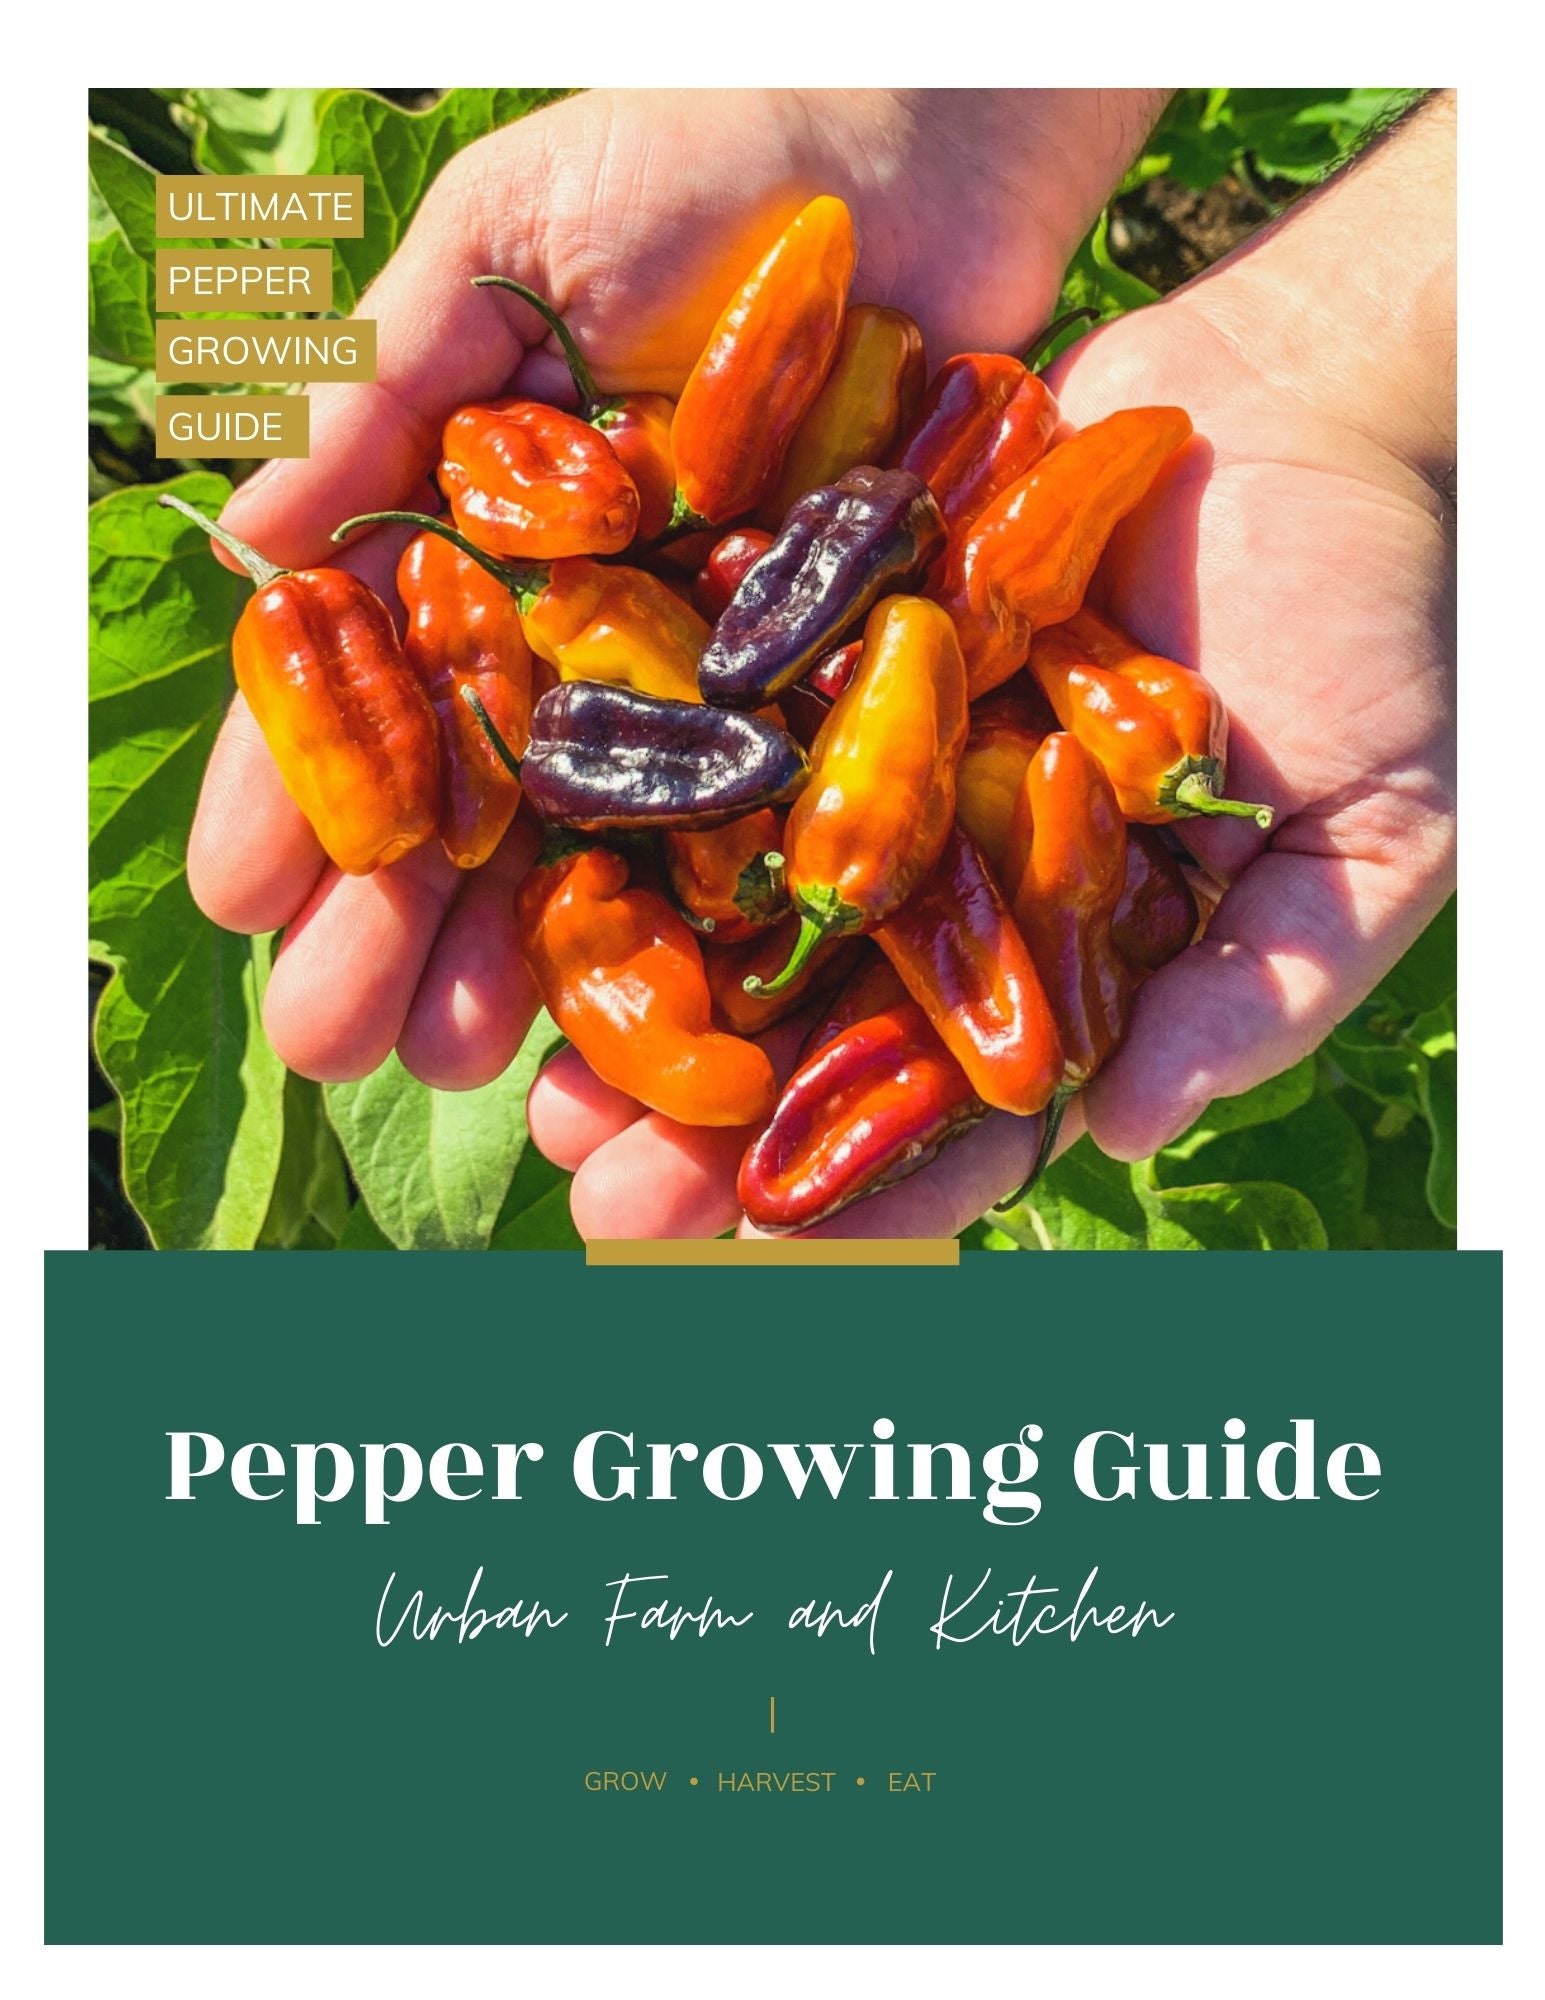 Pepper growing guide ebook cover